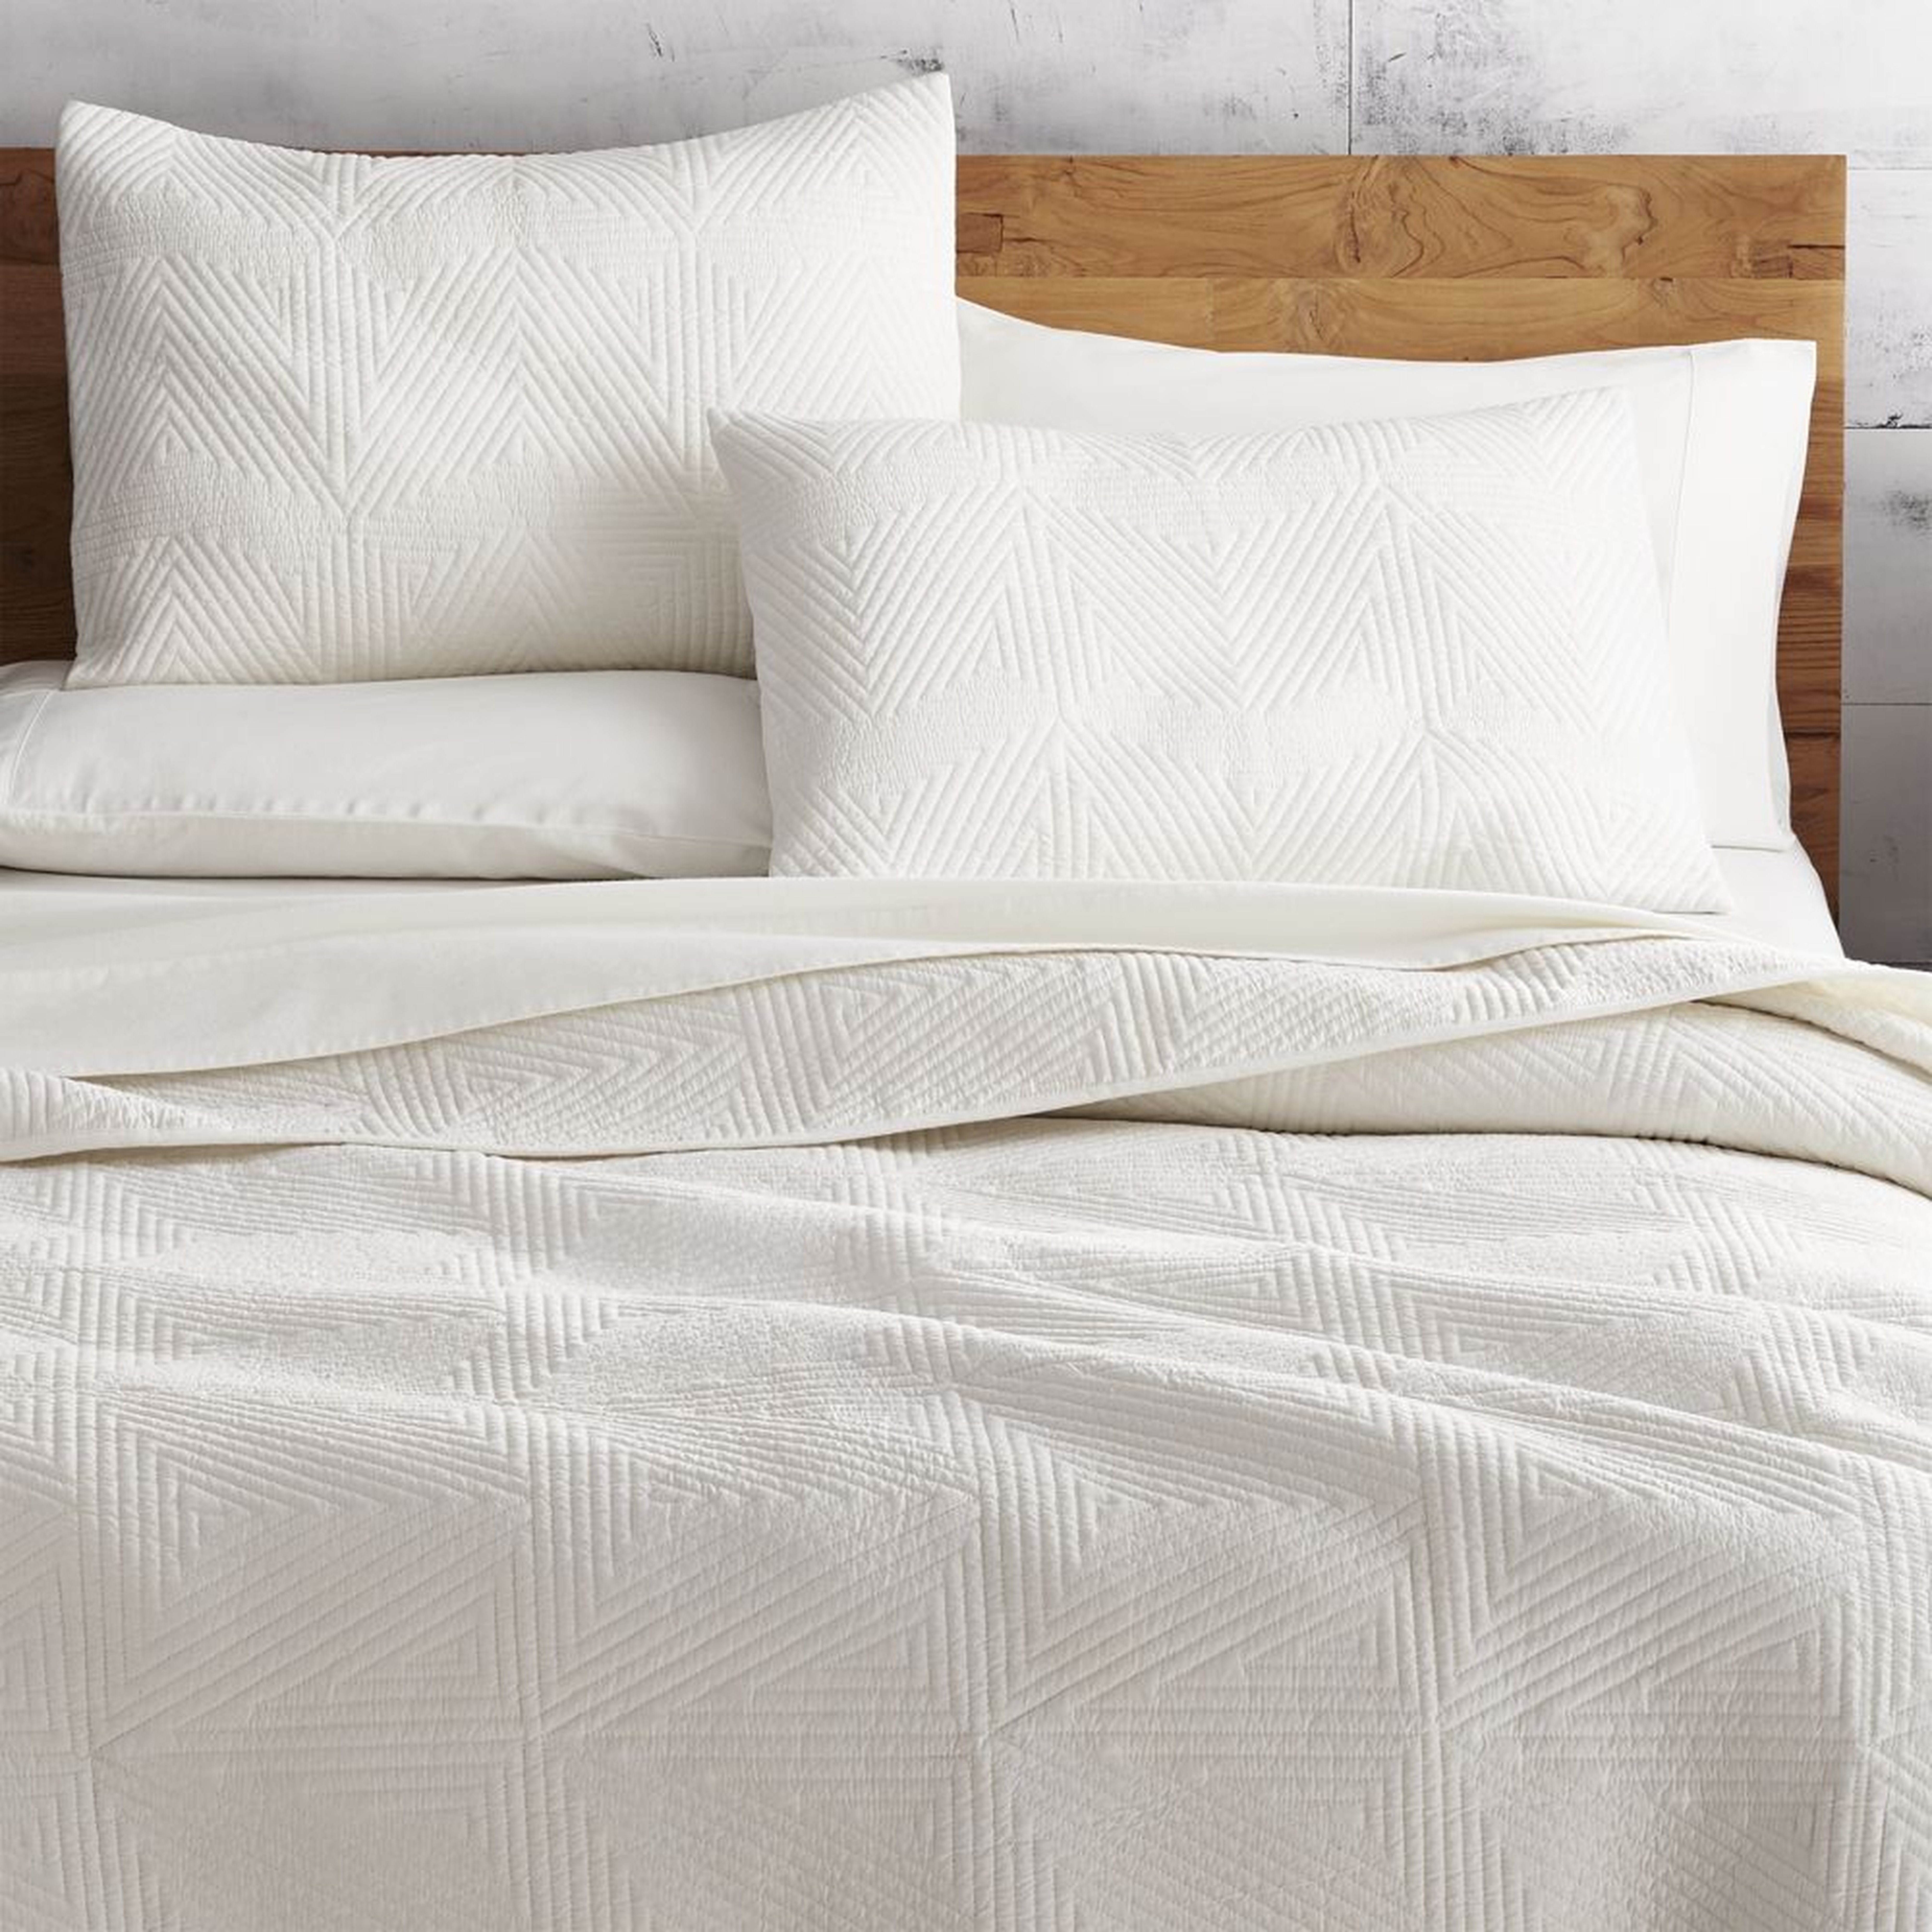 Triangle Ivory Coverlet Full/Queen - CB2